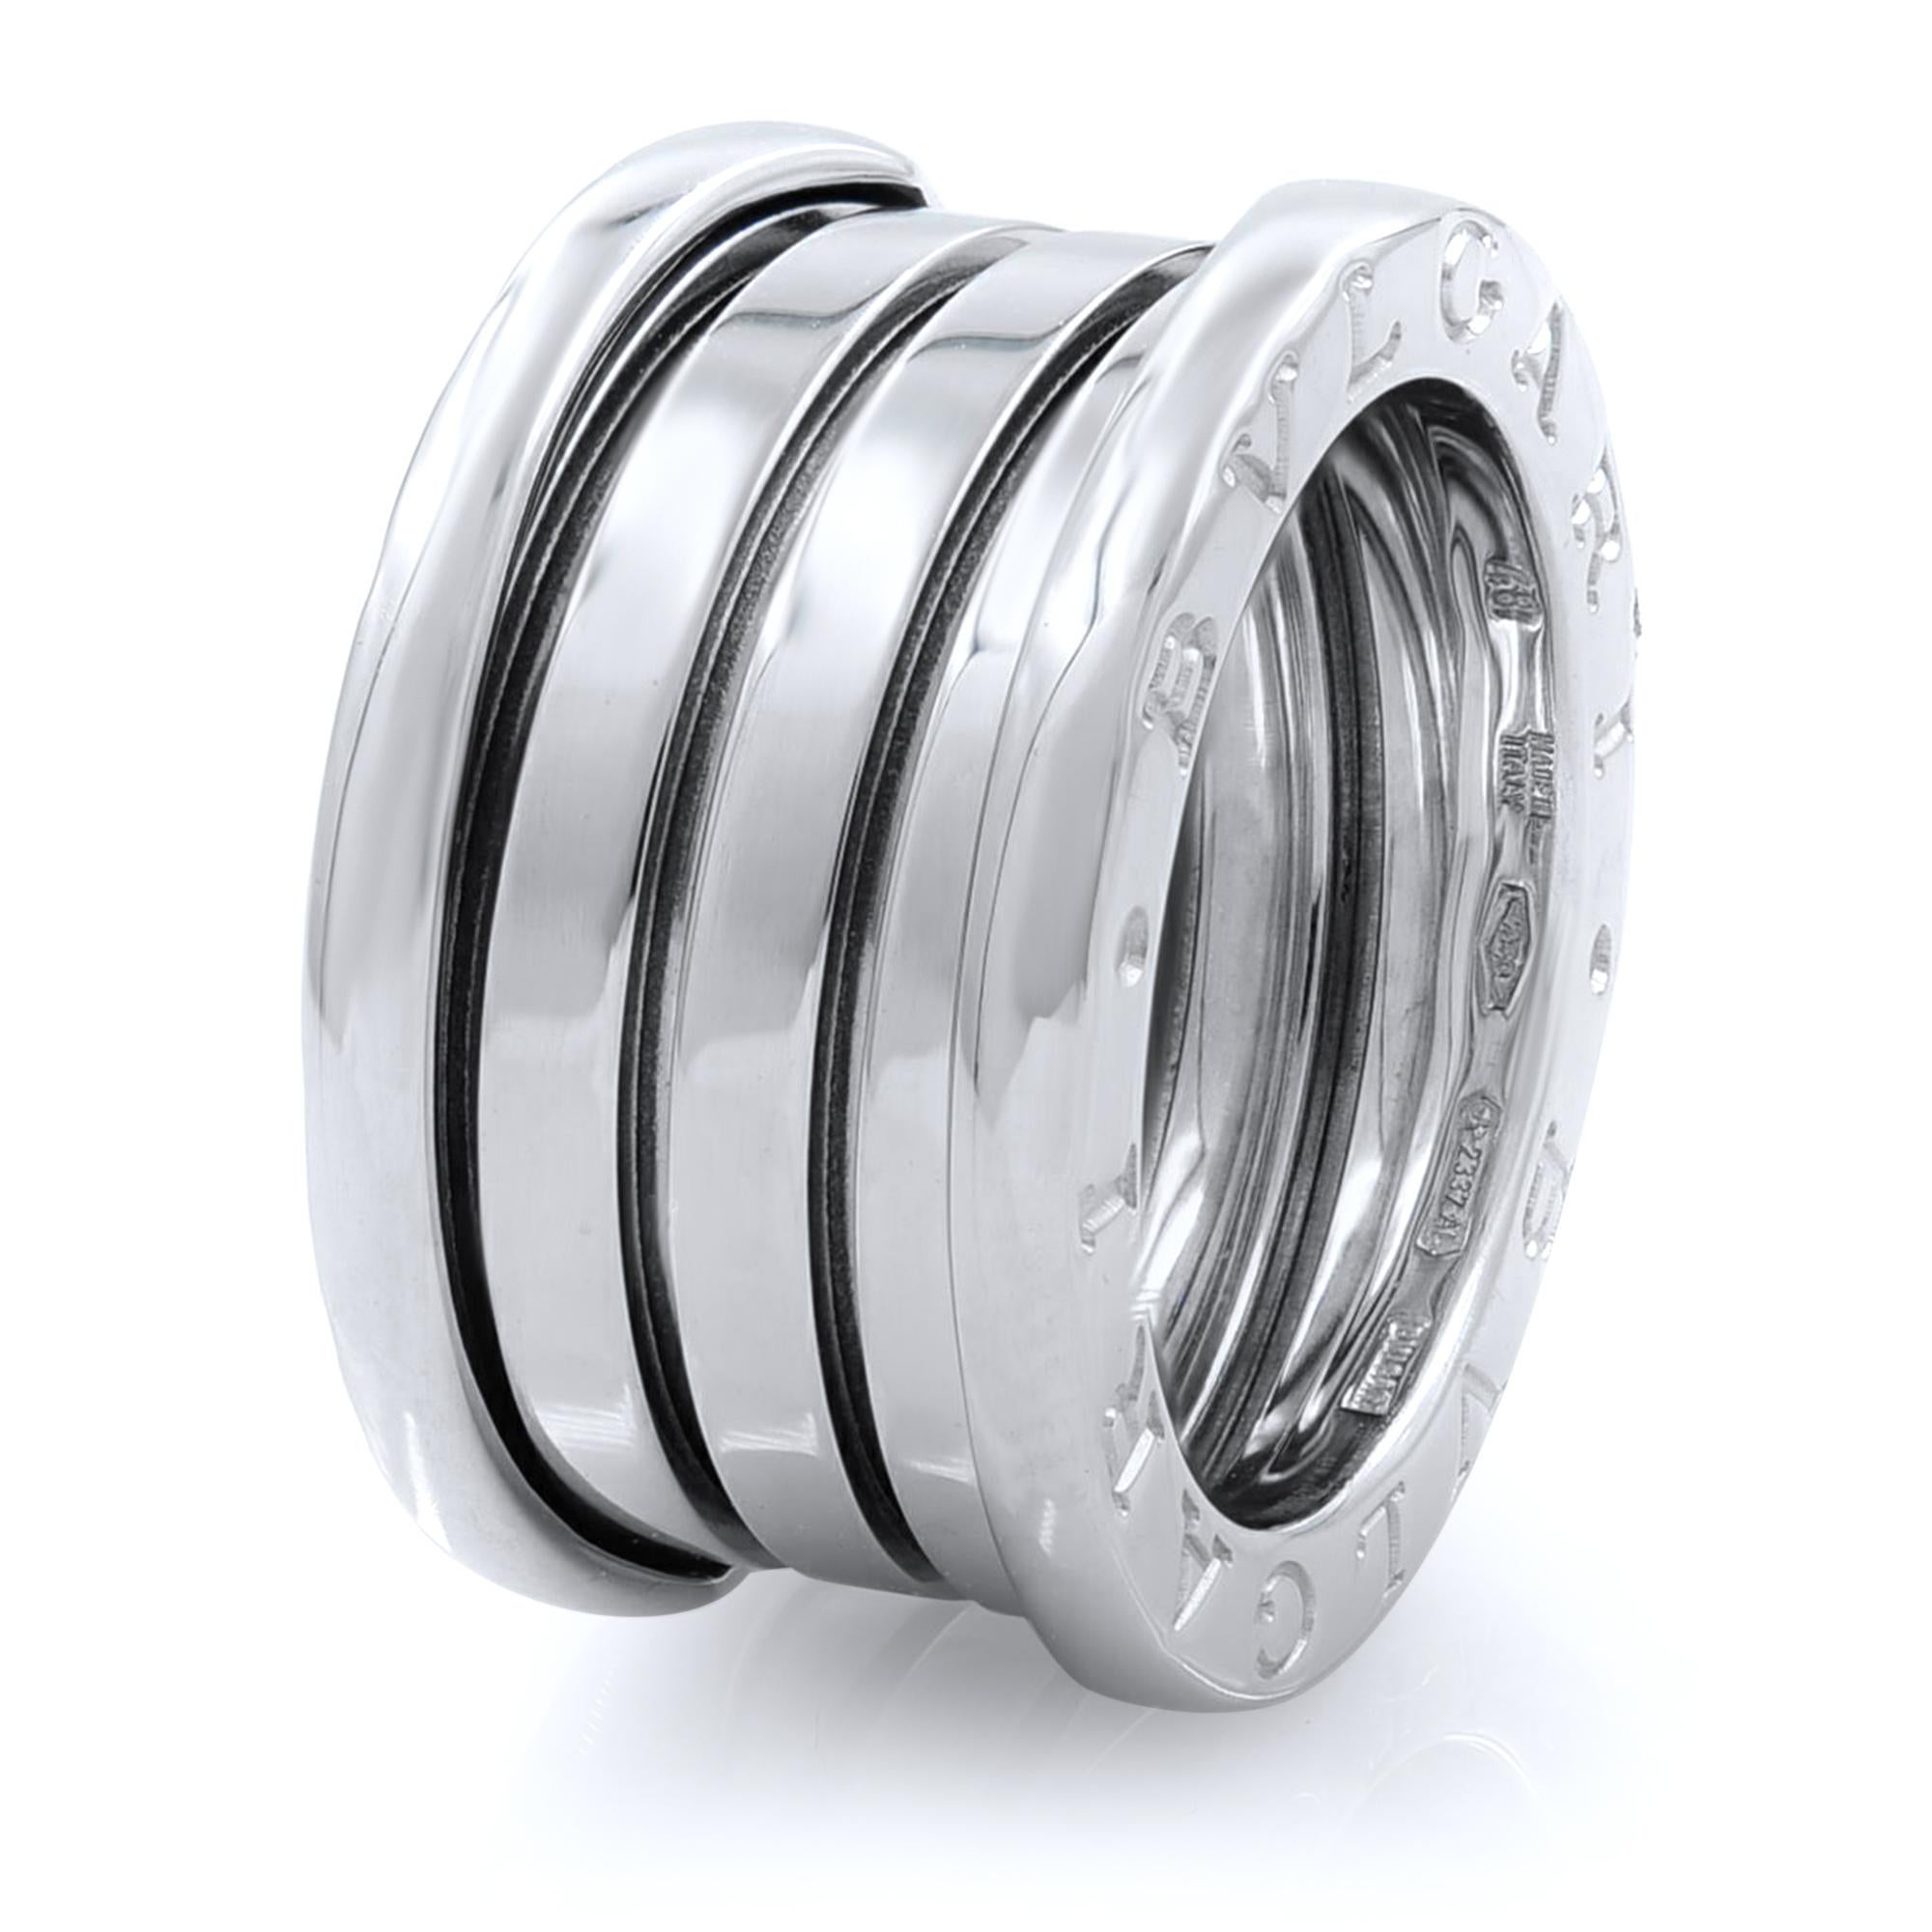 Bvlgari B.Zero 1 18K White Gold Ring SZ4.25

The B.Zero ring is a signature piece from the legendary jewelry design house Bvlgari. It features a clean, modern design with a white gold central band surrounded by two white gold rims with the BVLGARI